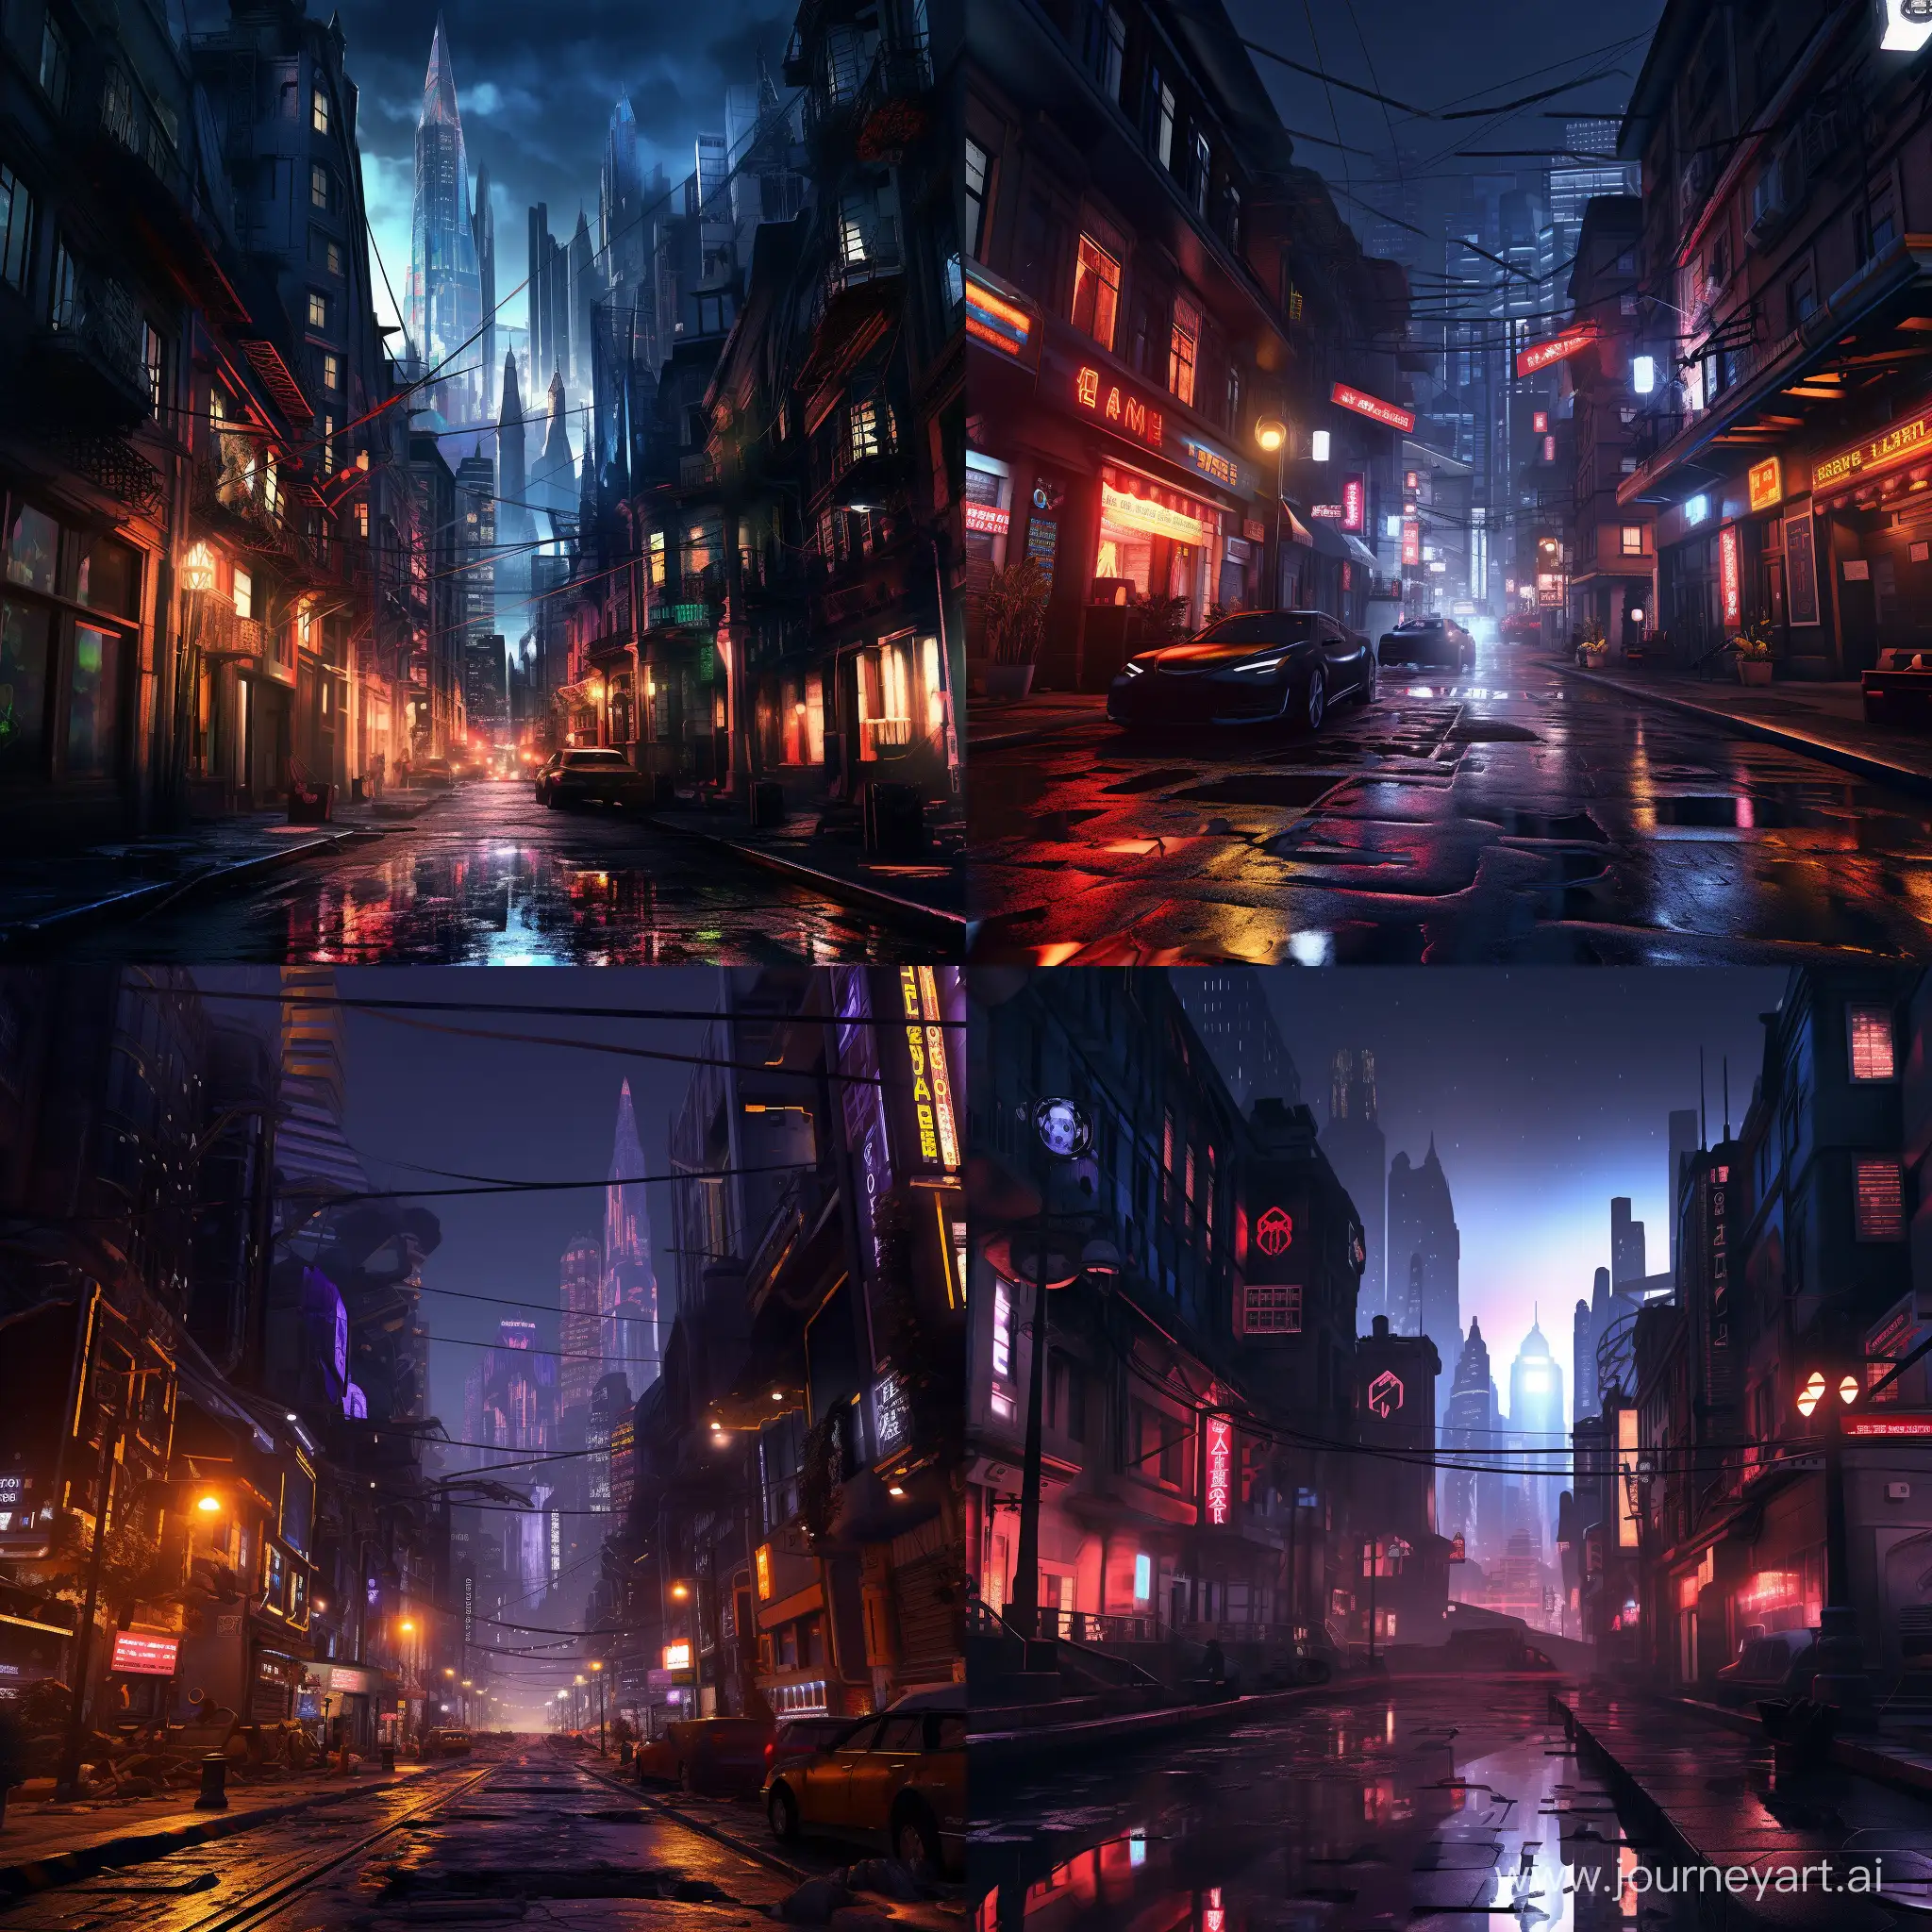 Futuristic-Synthwave-Cityscape-at-Dusk-Deus-Ex-Mankind-Divided-Inspired-Art